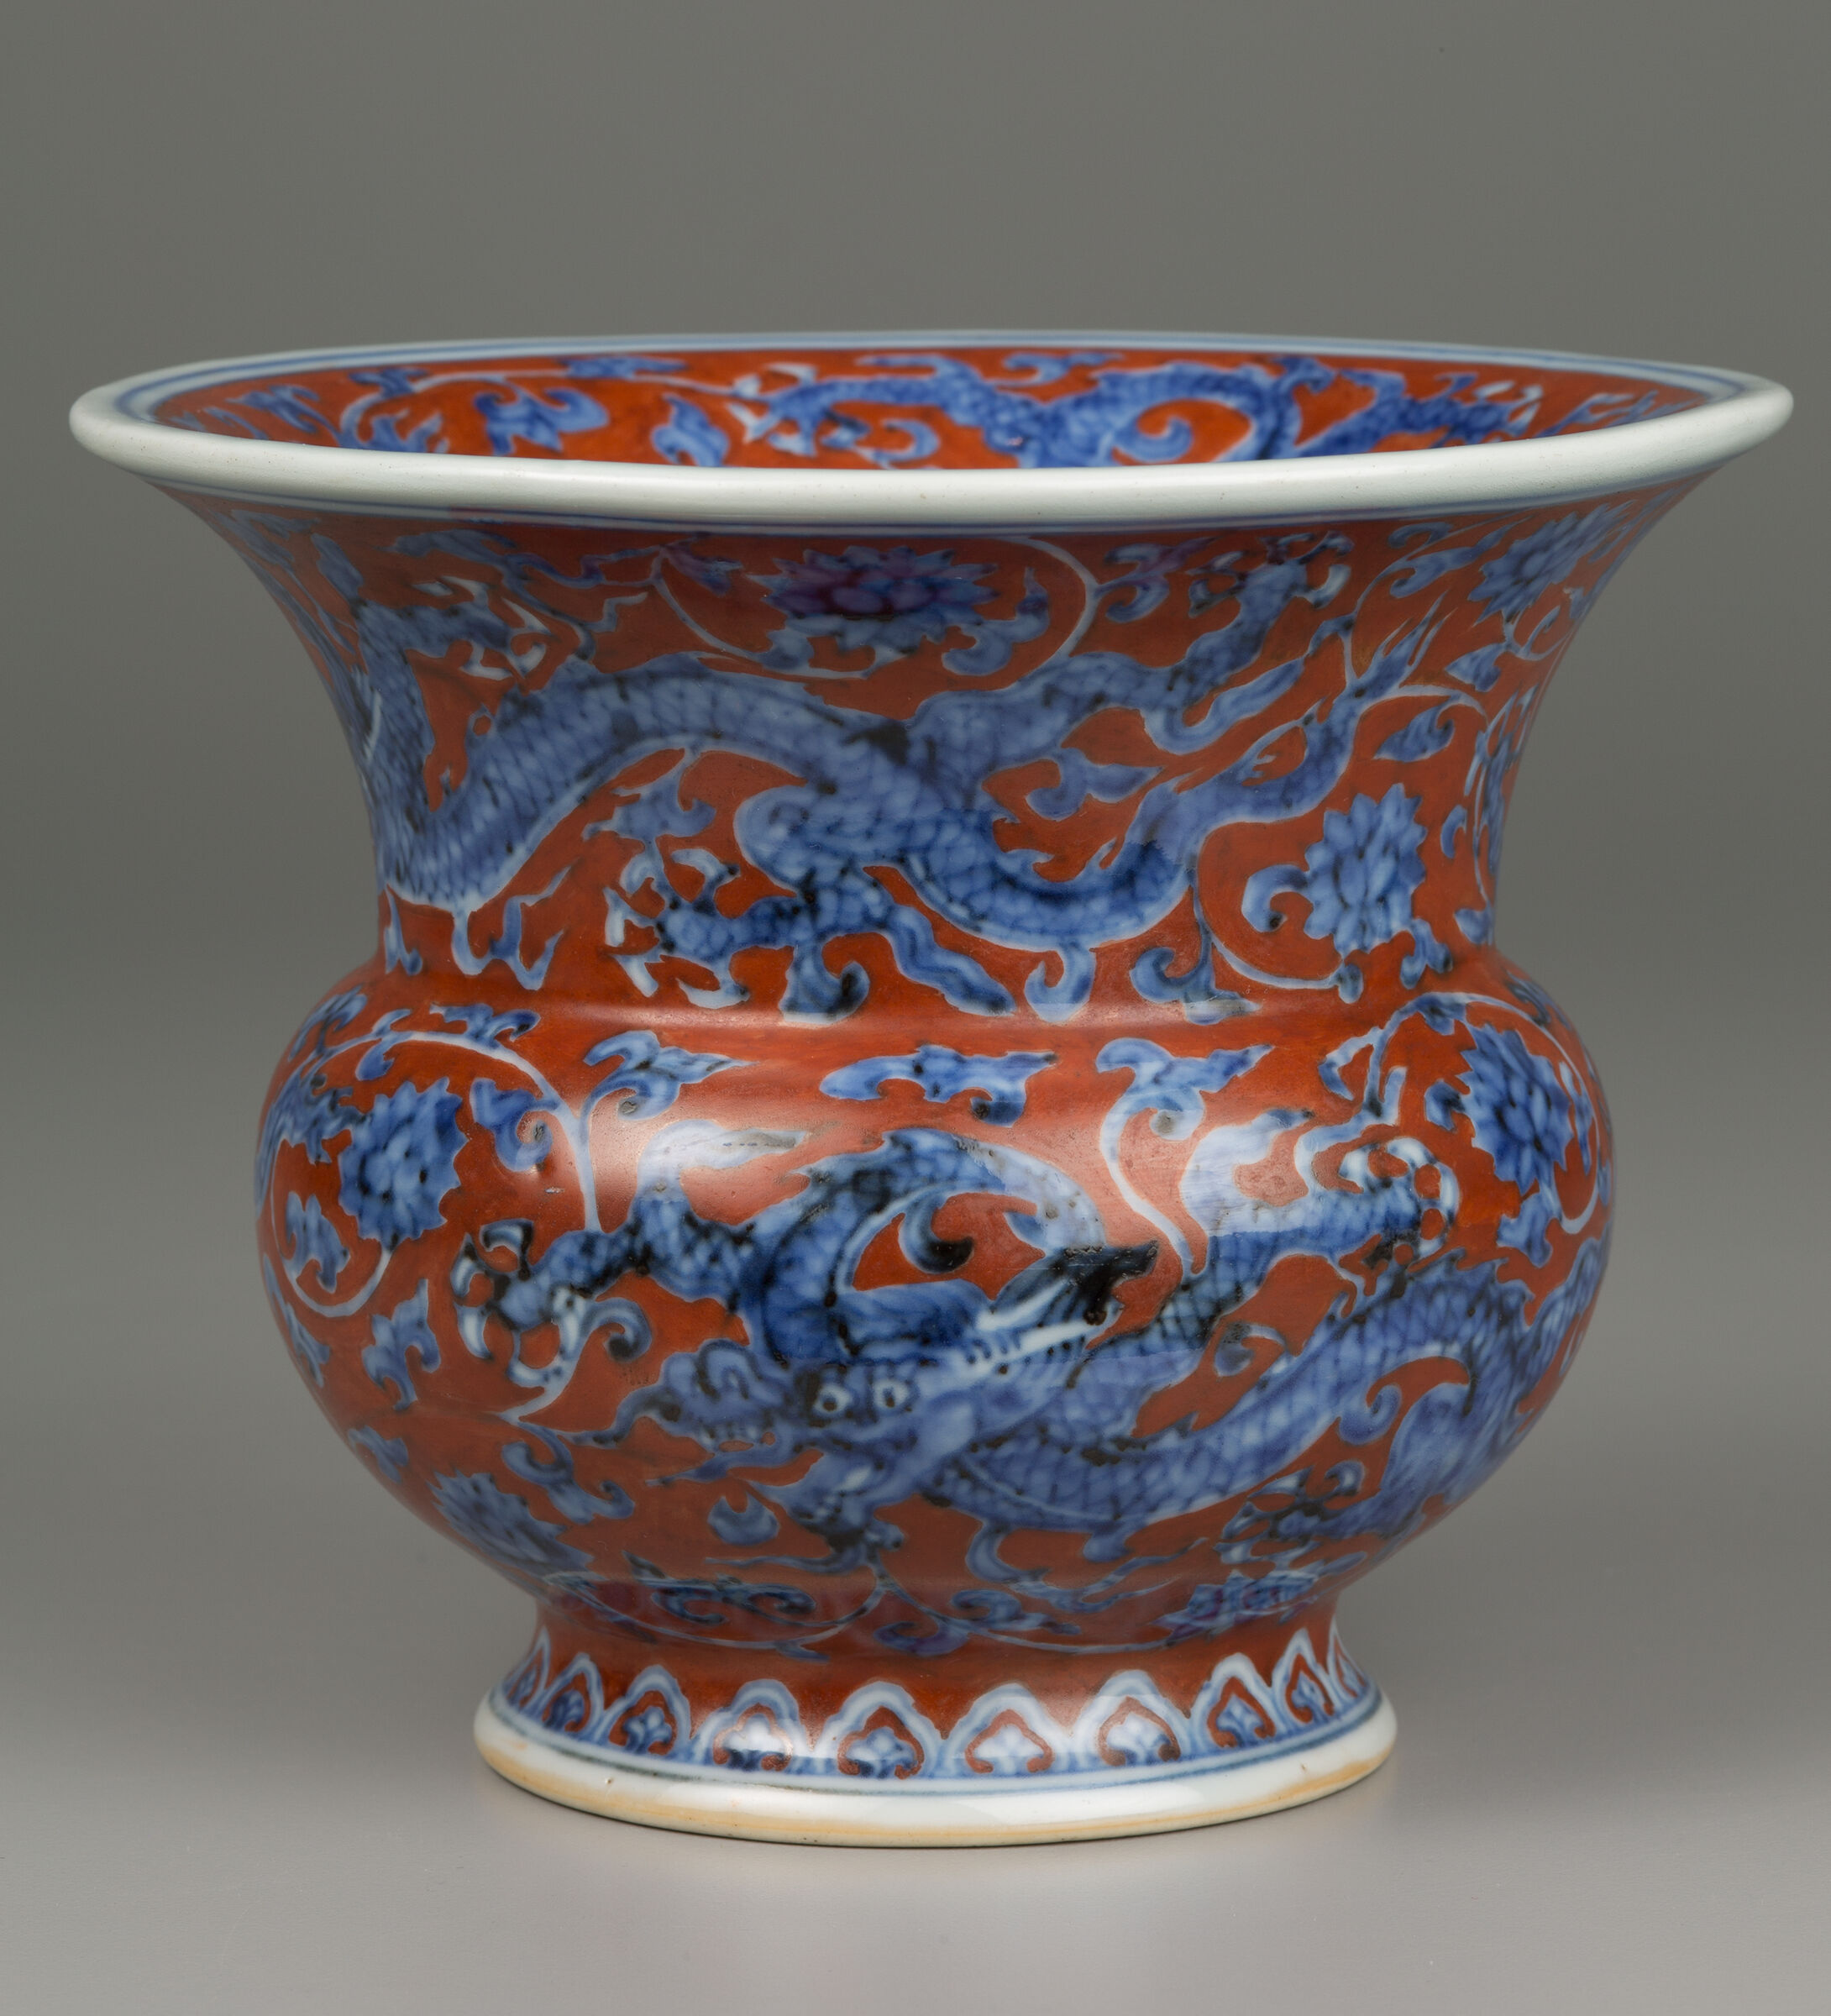 Zhadou-Shaped Vase With Dragons And Scrolling Flower Decor